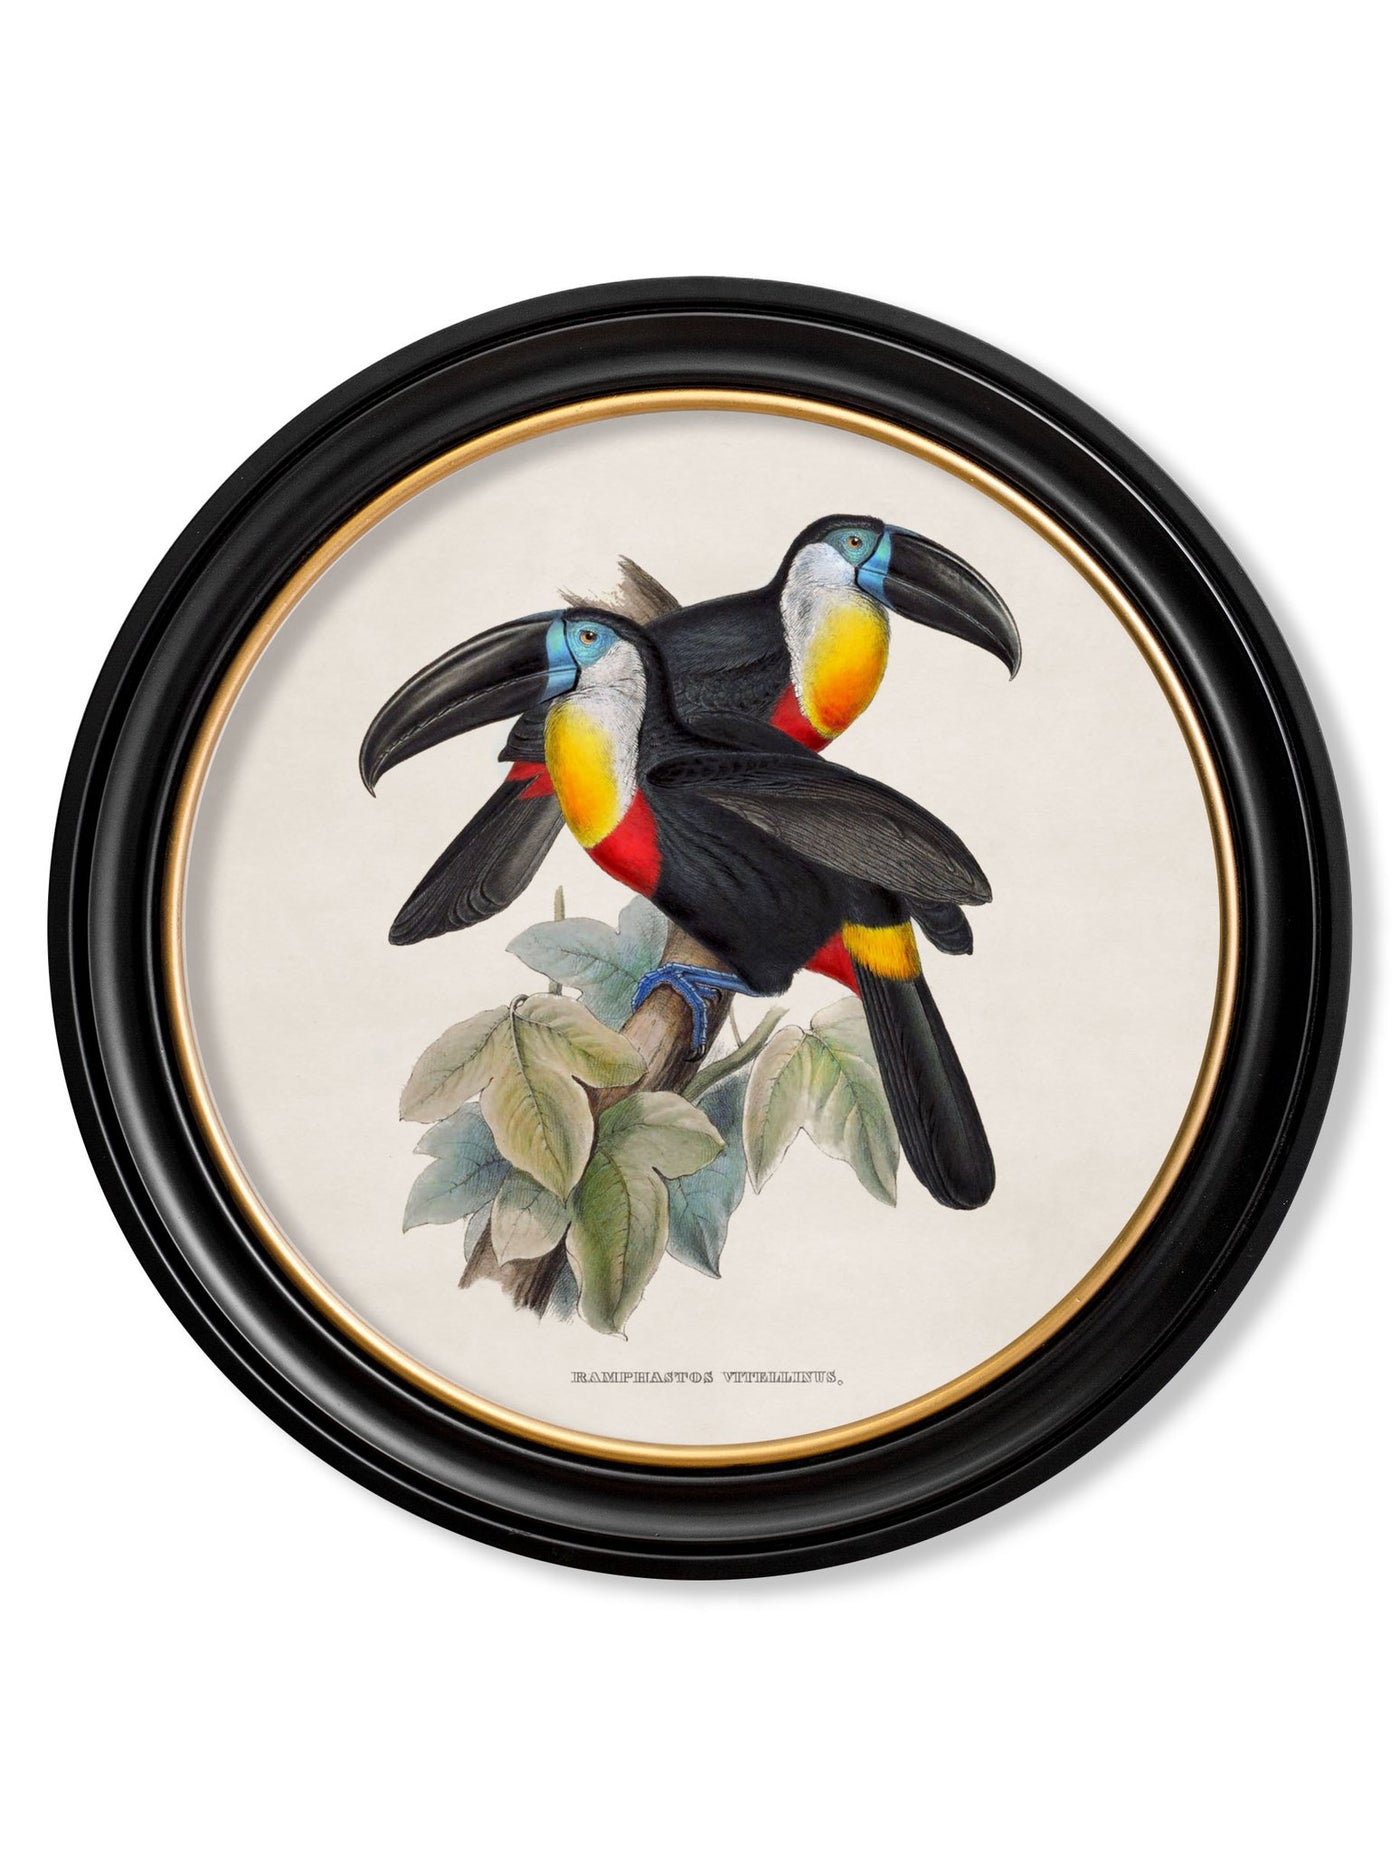 C.1848 TOUCANS - ROUND FRAMES - TheArtistsQuarter